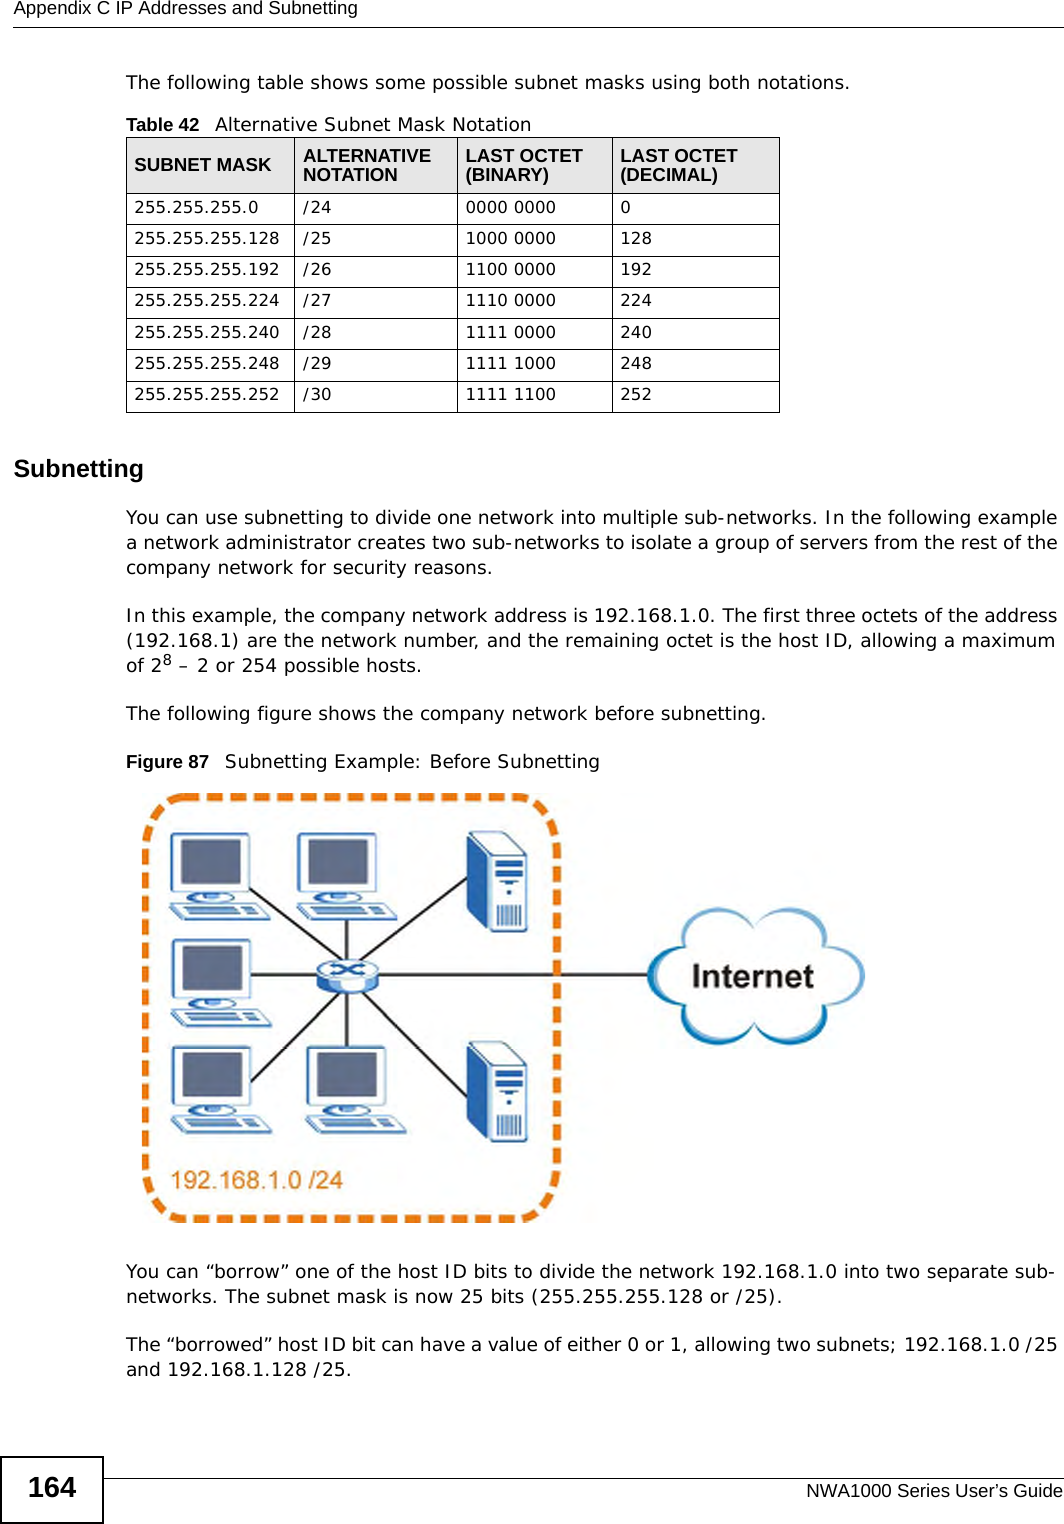 Appendix C IP Addresses and SubnettingNWA1000 Series User’s Guide164The following table shows some possible subnet masks using both notations. SubnettingYou can use subnetting to divide one network into multiple sub-networks. In the following example a network administrator creates two sub-networks to isolate a group of servers from the rest of the company network for security reasons.In this example, the company network address is 192.168.1.0. The first three octets of the address (192.168.1) are the network number, and the remaining octet is the host ID, allowing a maximum of 28 – 2 or 254 possible hosts.The following figure shows the company network before subnetting. Figure 87   Subnetting Example: Before SubnettingYou can “borrow” one of the host ID bits to divide the network 192.168.1.0 into two separate sub-networks. The subnet mask is now 25 bits (255.255.255.128 or /25).The “borrowed” host ID bit can have a value of either 0 or 1, allowing two subnets; 192.168.1.0 /25 and 192.168.1.128 /25. Table 42   Alternative Subnet Mask NotationSUBNET MASK ALTERNATIVE NOTATION LAST OCTET (BINARY) LAST OCTET (DECIMAL)255.255.255.0 /24 0000 0000 0255.255.255.128 /25 1000 0000 128255.255.255.192 /26 1100 0000 192255.255.255.224 /27 1110 0000 224255.255.255.240 /28 1111 0000 240255.255.255.248 /29 1111 1000 248255.255.255.252 /30 1111 1100 252